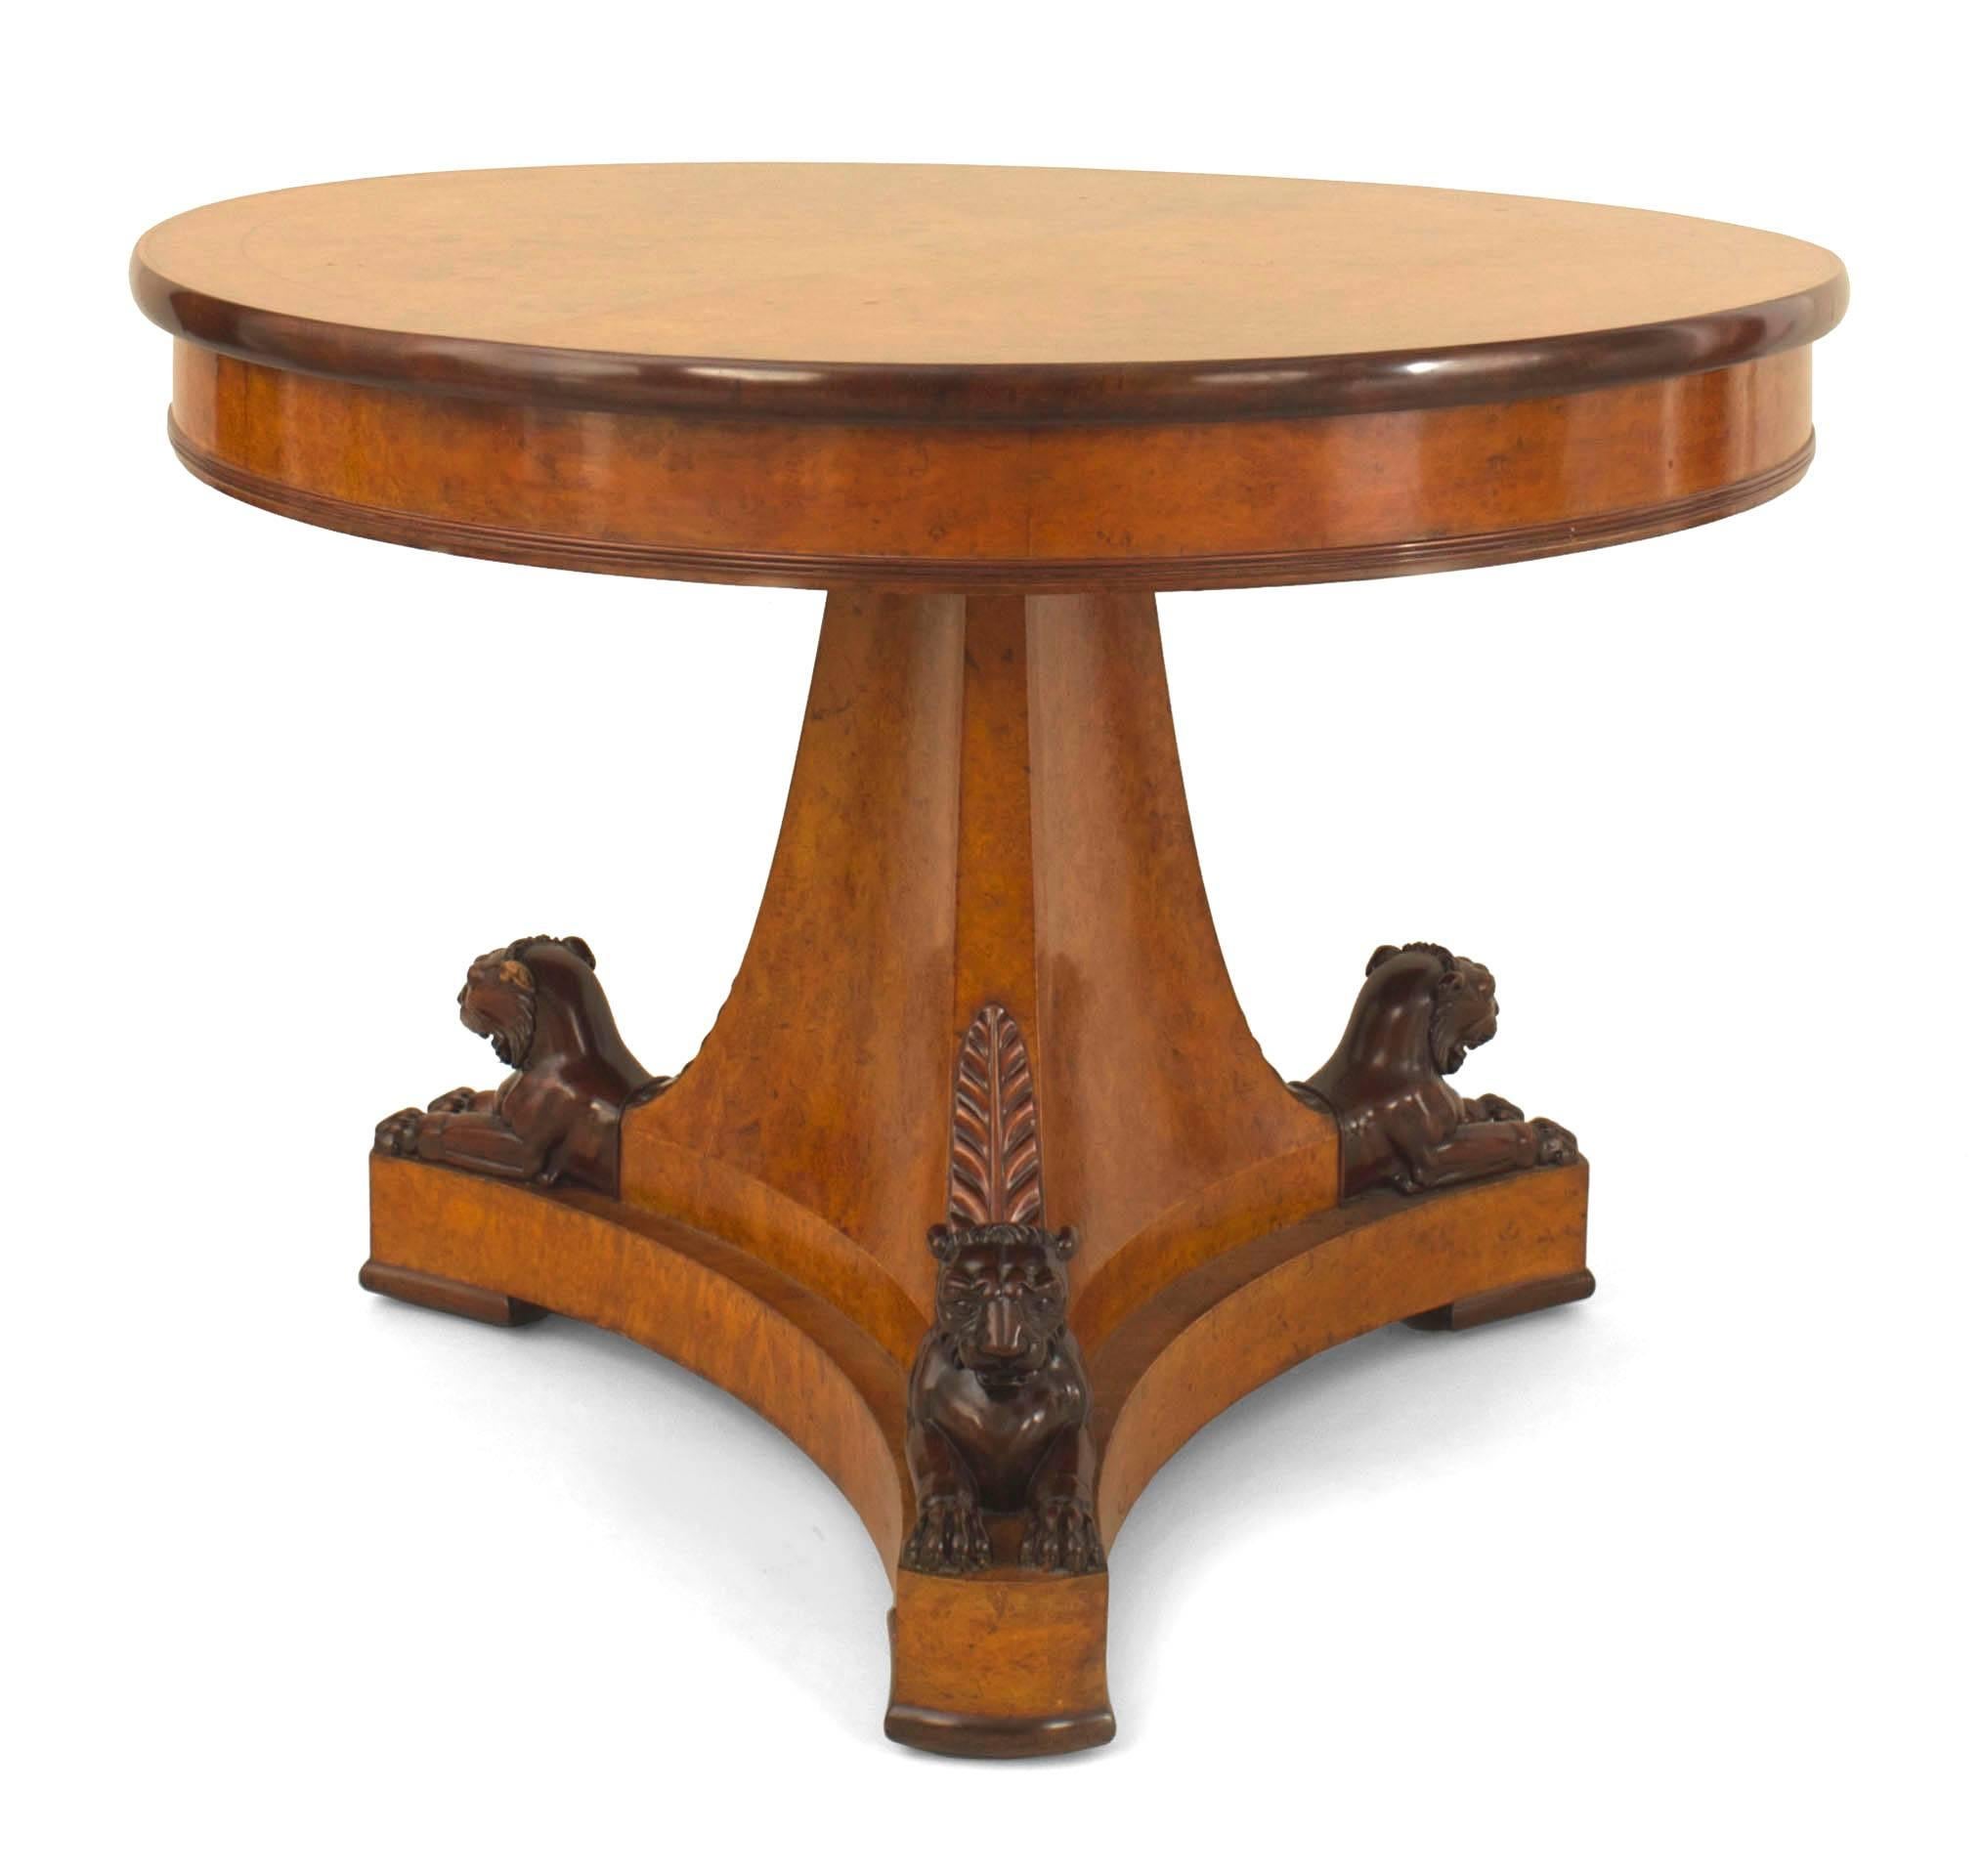 French Charles X (1830s) amaranth wood center table with a banded inlaid round top resting on a triangular pedestal base with mahogany carved trim and reclining lions.
